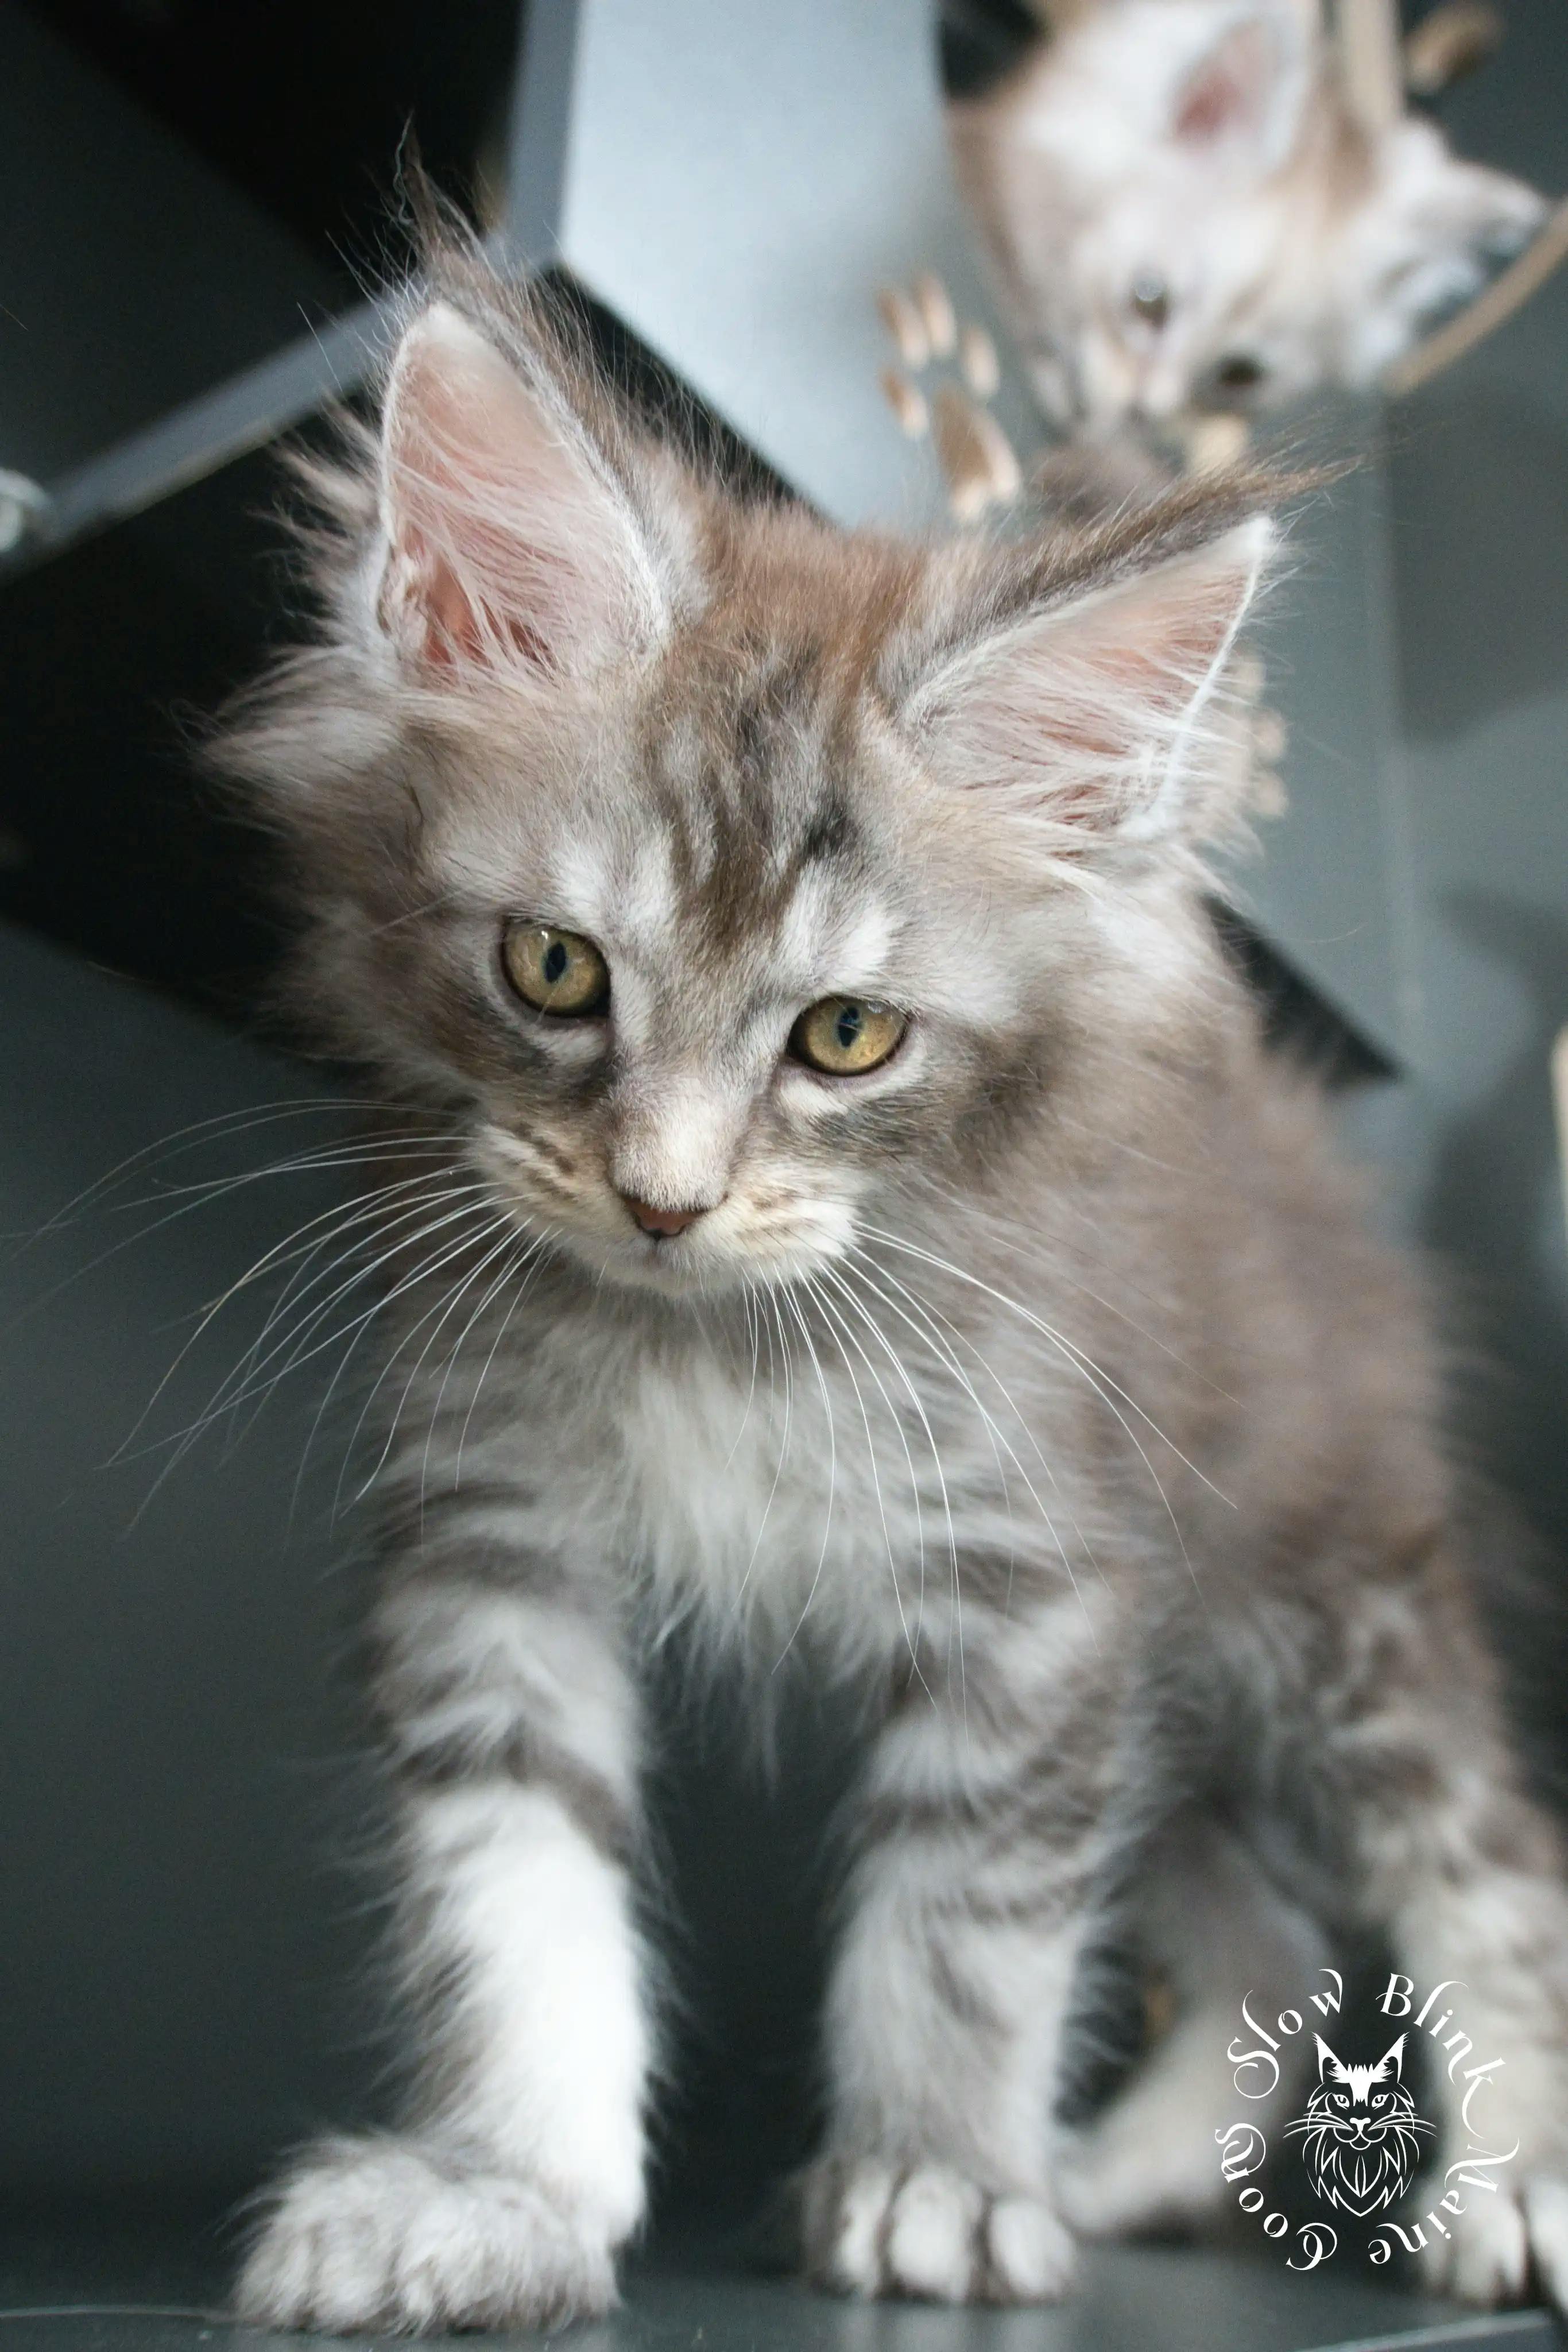 Blue Silver Tabby Maine Coon Kittens > blue silver tabby maine coon kitten | slowblinkmainecoons | 965